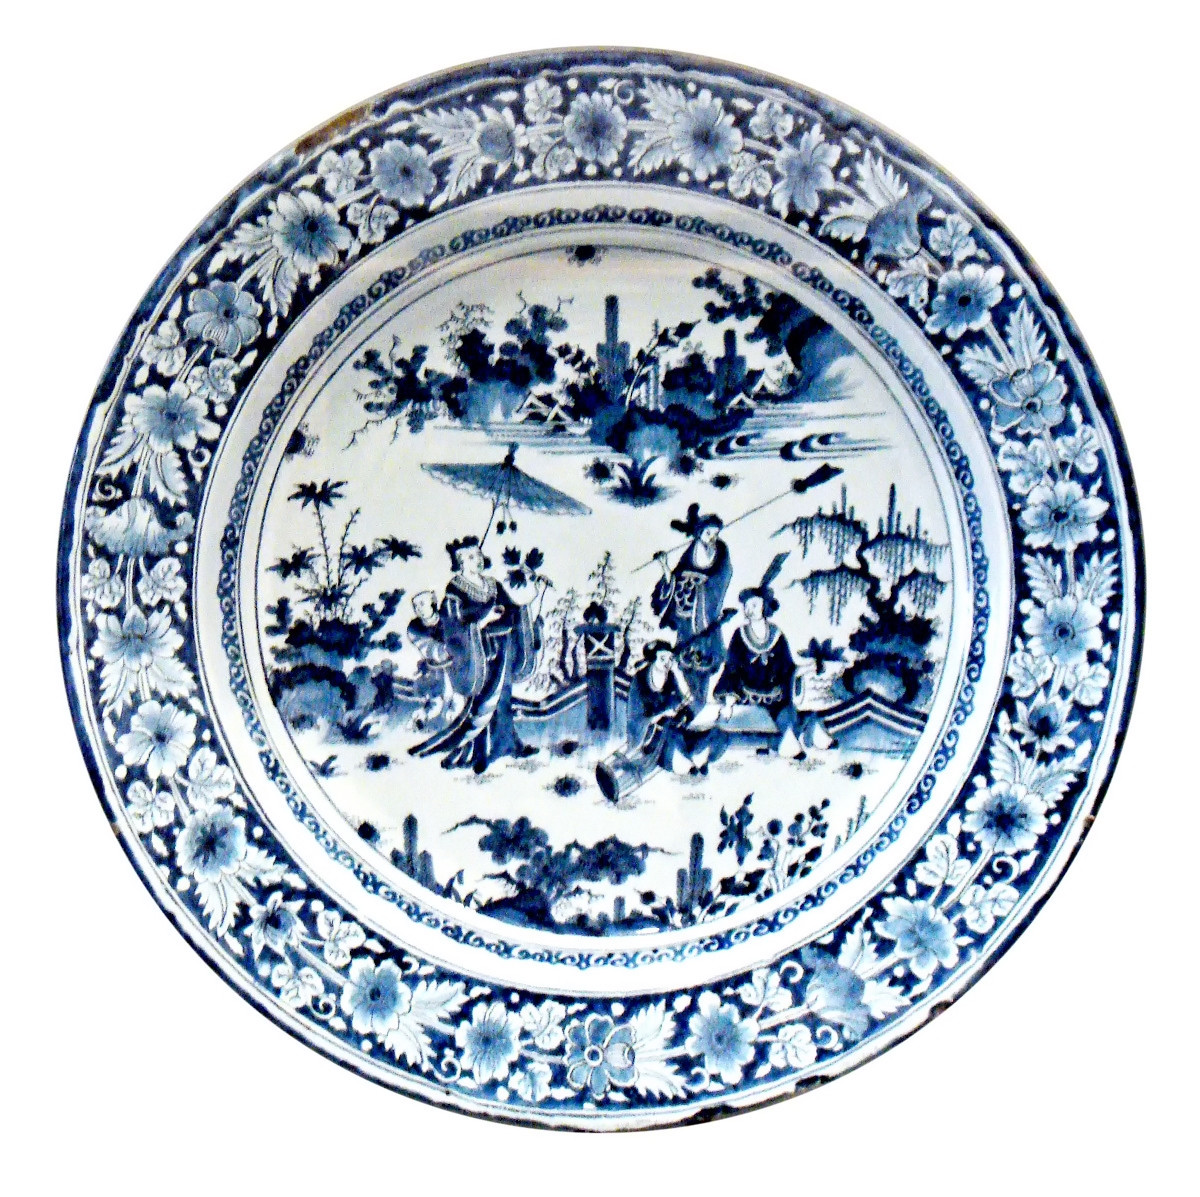 Faience with Chinese scenes. Nevers Manufactory. c. 1680